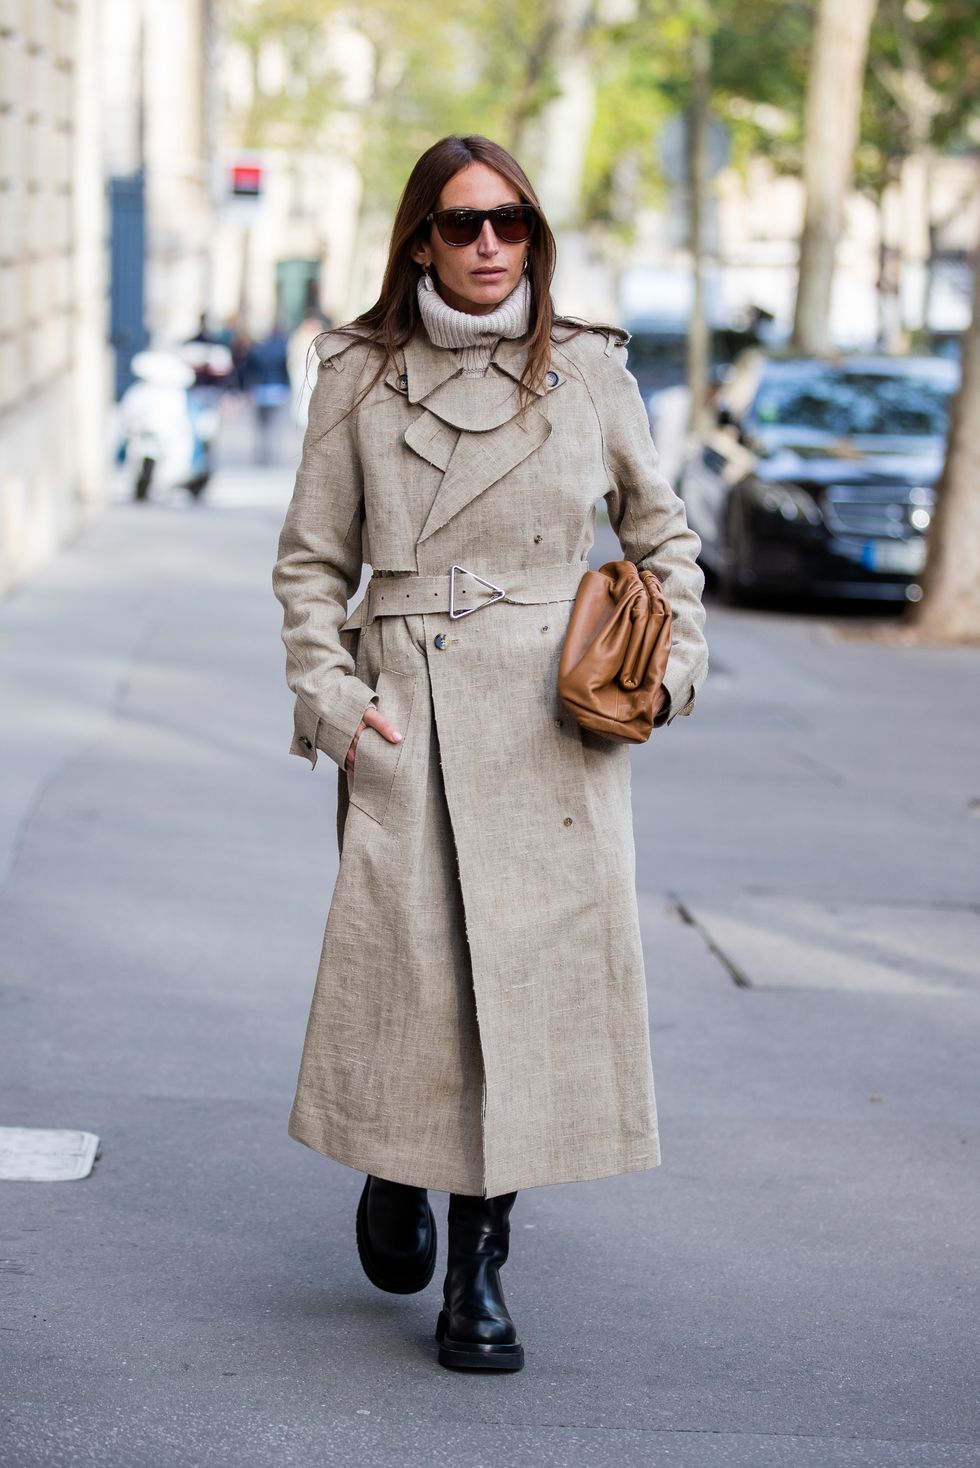 paris, france   september 27 chloe harrouche wearing trench coat, brown bottega veneta bag, boots outside alessandra rich during paris fashion week womenswear spring summer 2020 on september 27, 2019 in paris, france photo by christian vieriggetty images